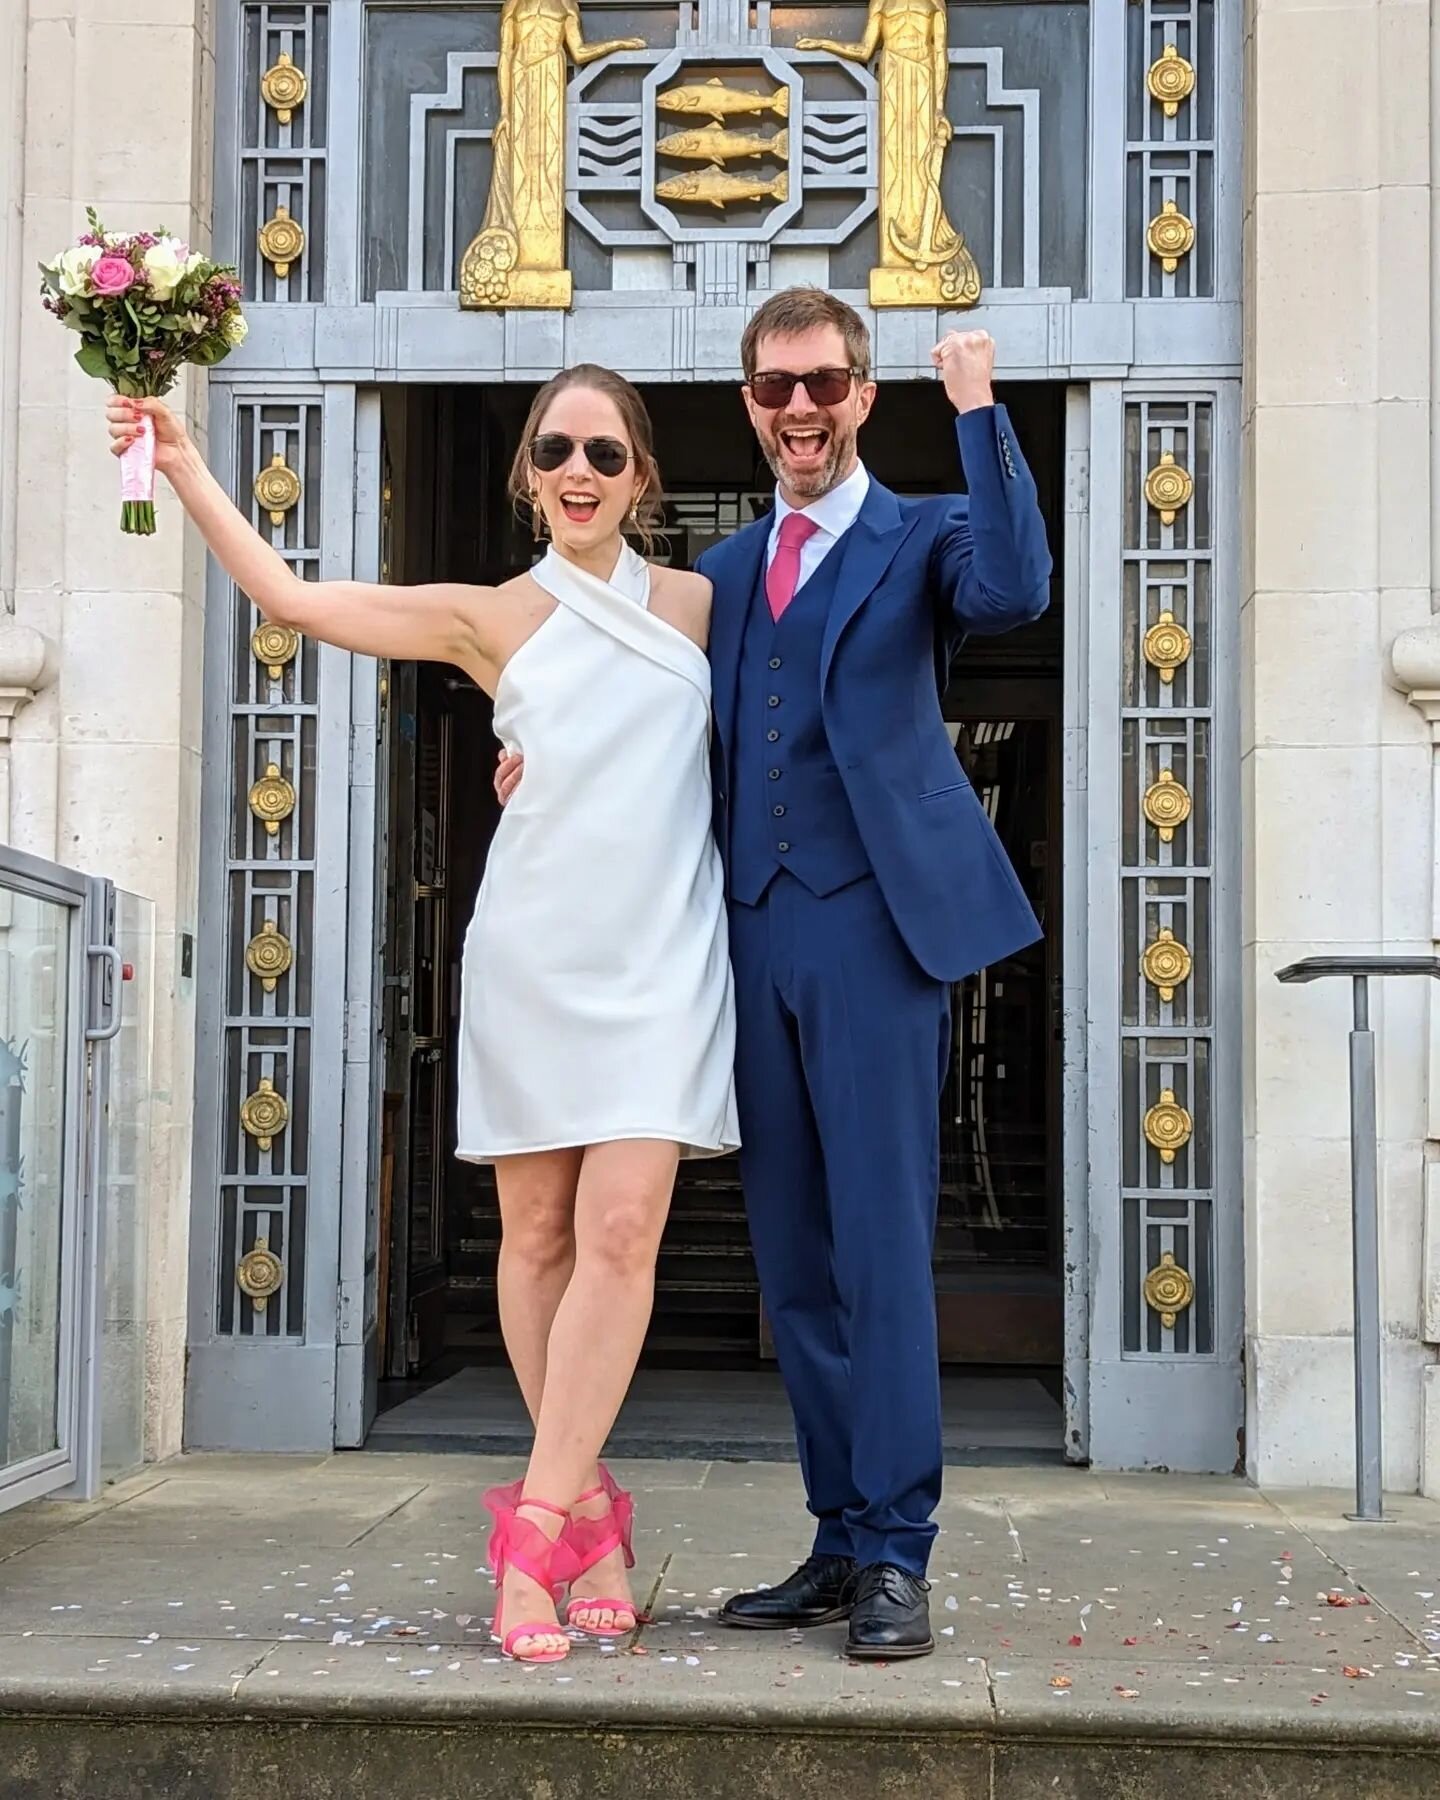 Two years since our first lockdown video date, we got married! 💍🎉🍾

We had the most glorious registry office wedding* with a tiny handful of friends in our hometown, followed by the Margate mini-moon of dreams. We are now officially the happiest p